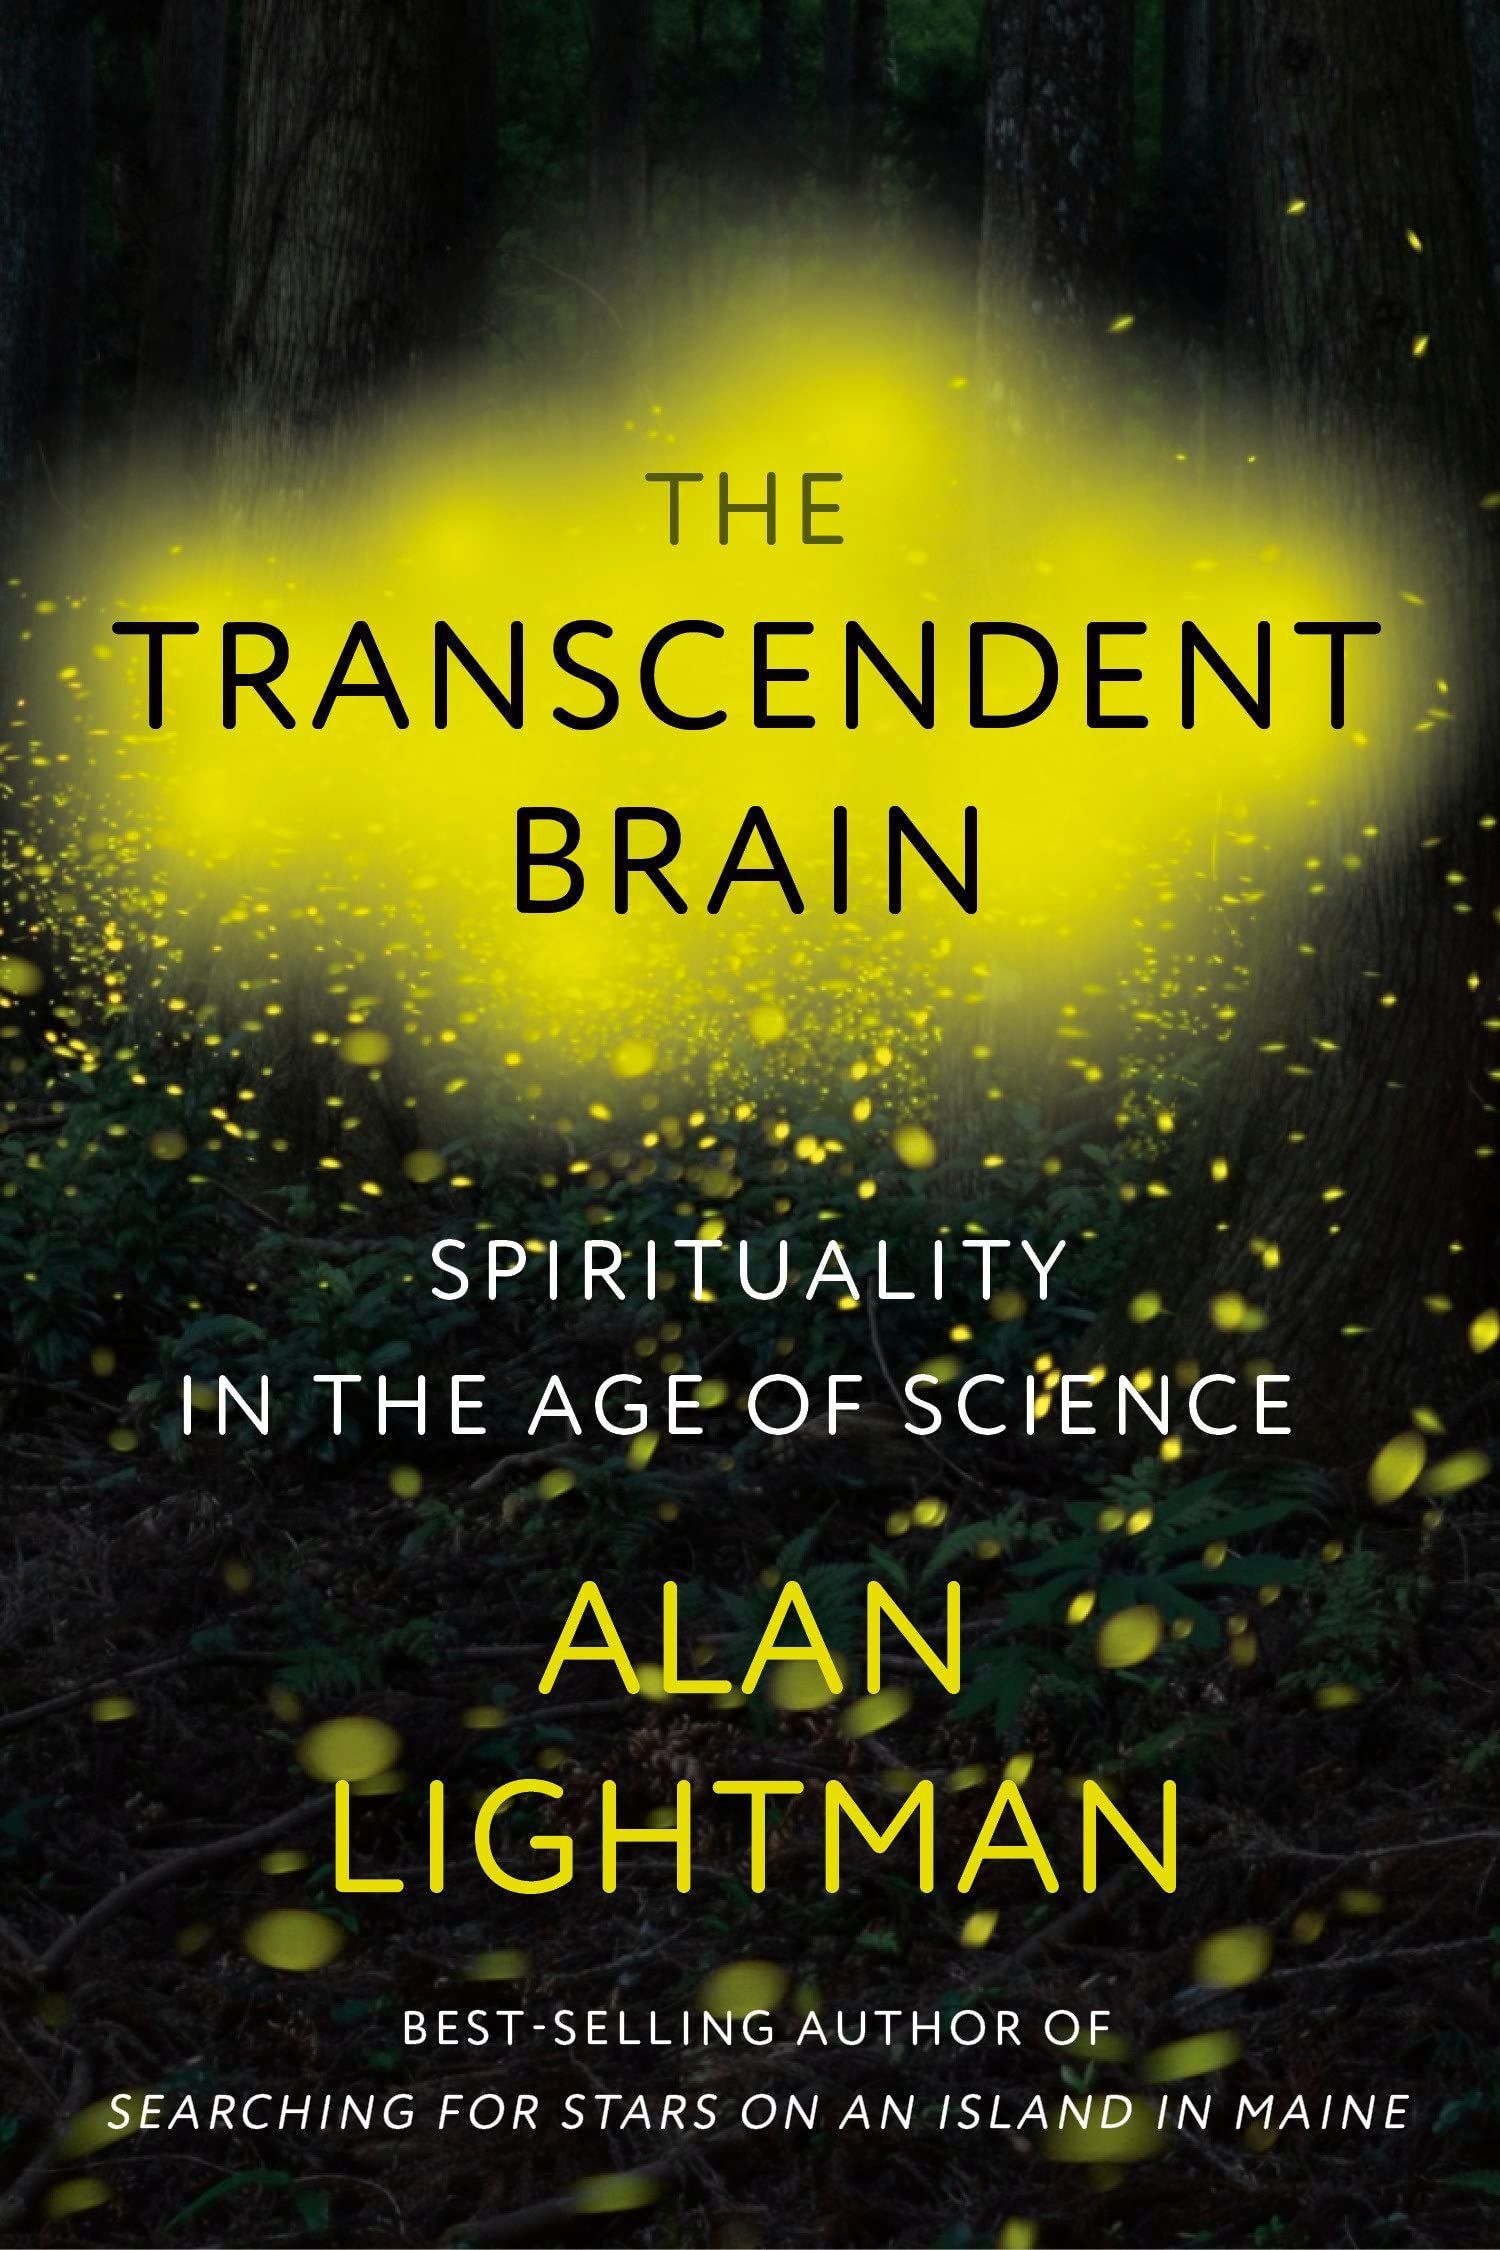 Does a Final Theory Exist?: A Conversation with Alan Lightman